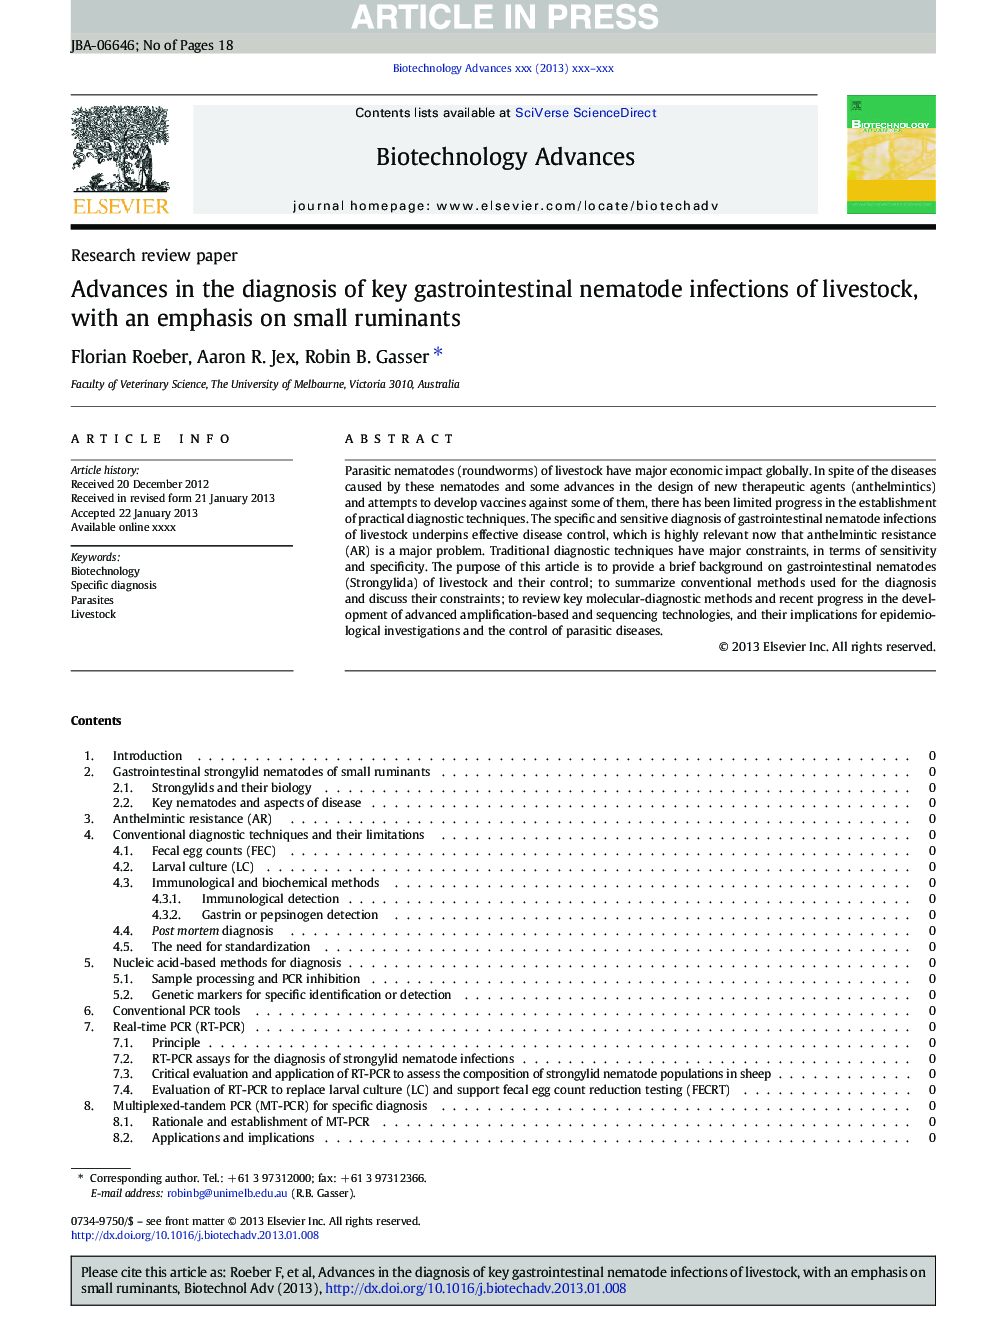 Advances in the diagnosis of key gastrointestinal nematode infections of livestock, with an emphasis on small ruminants